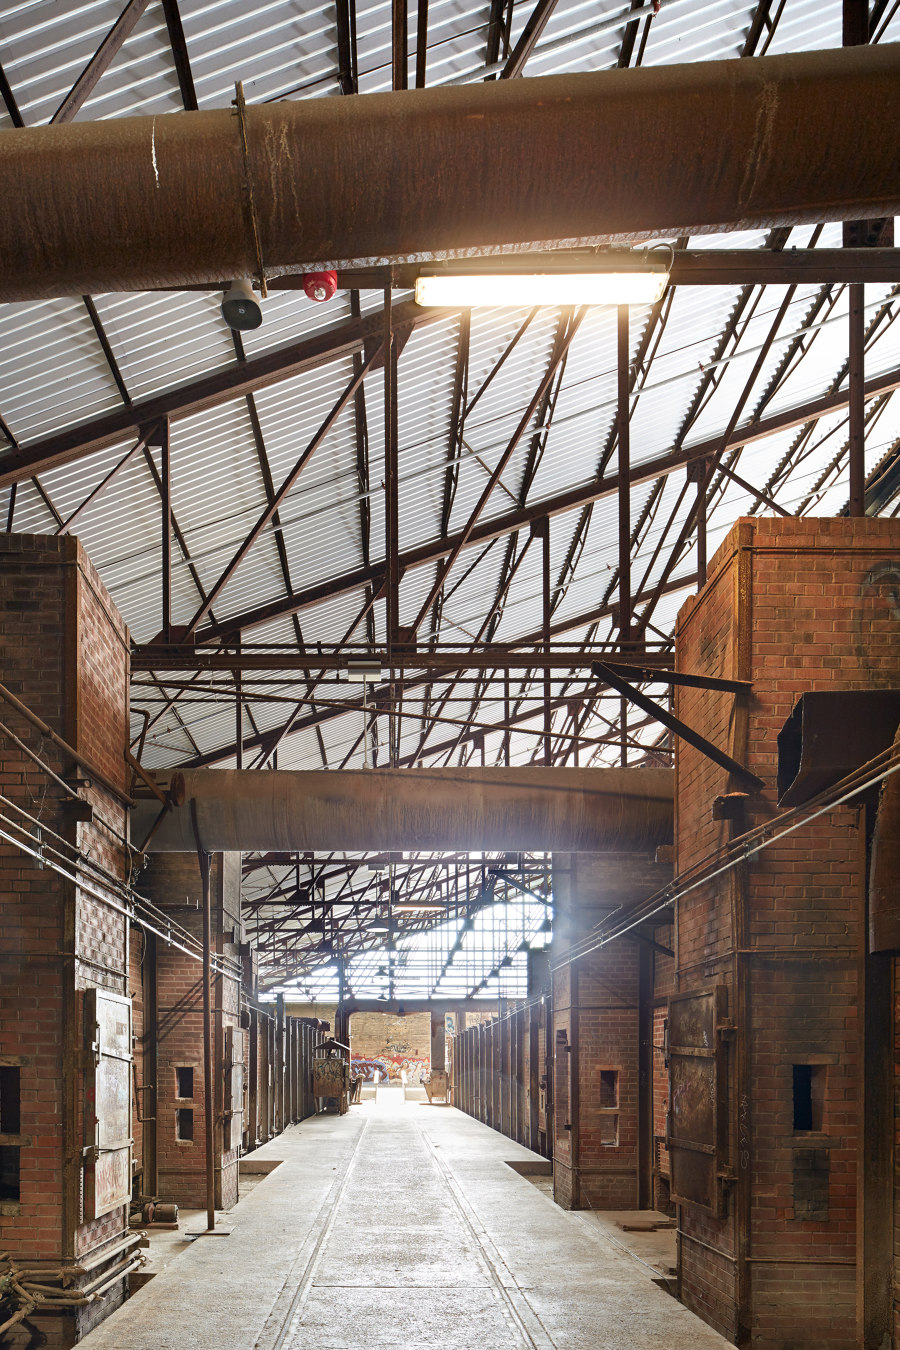 Evergreen Brick Works Kiln Building Redevelopment by LGA Architectural Partners | Church architecture / community centres